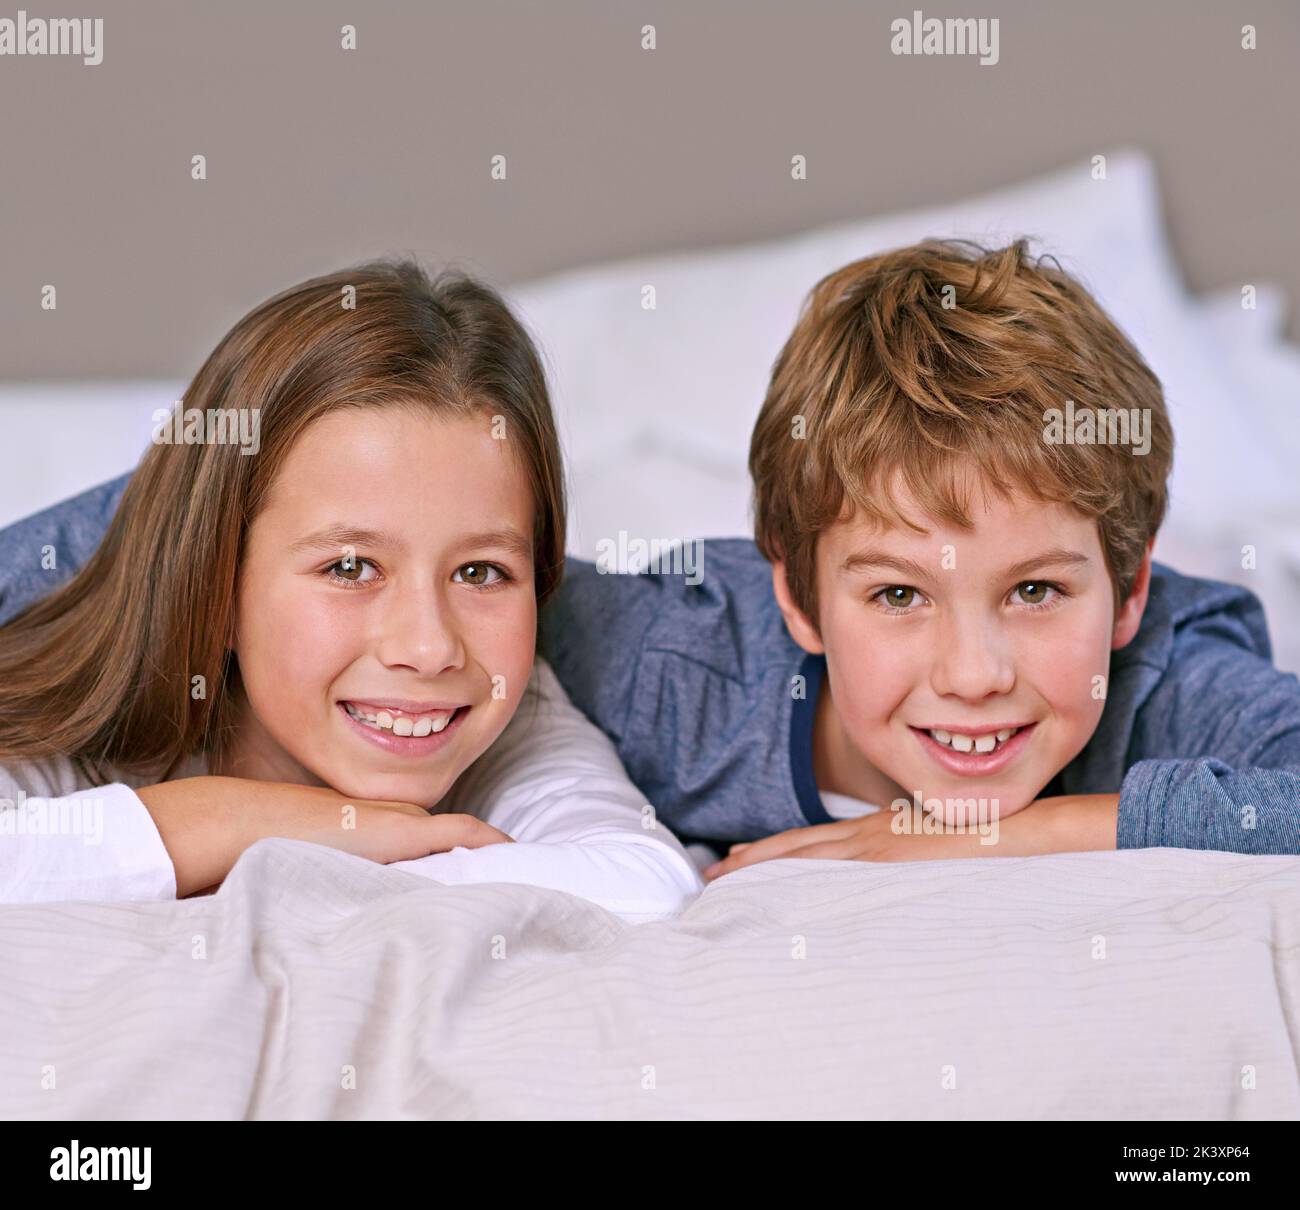 Growing up together. Portrait of a brother and sister lying on a bed at home. Stock Photo